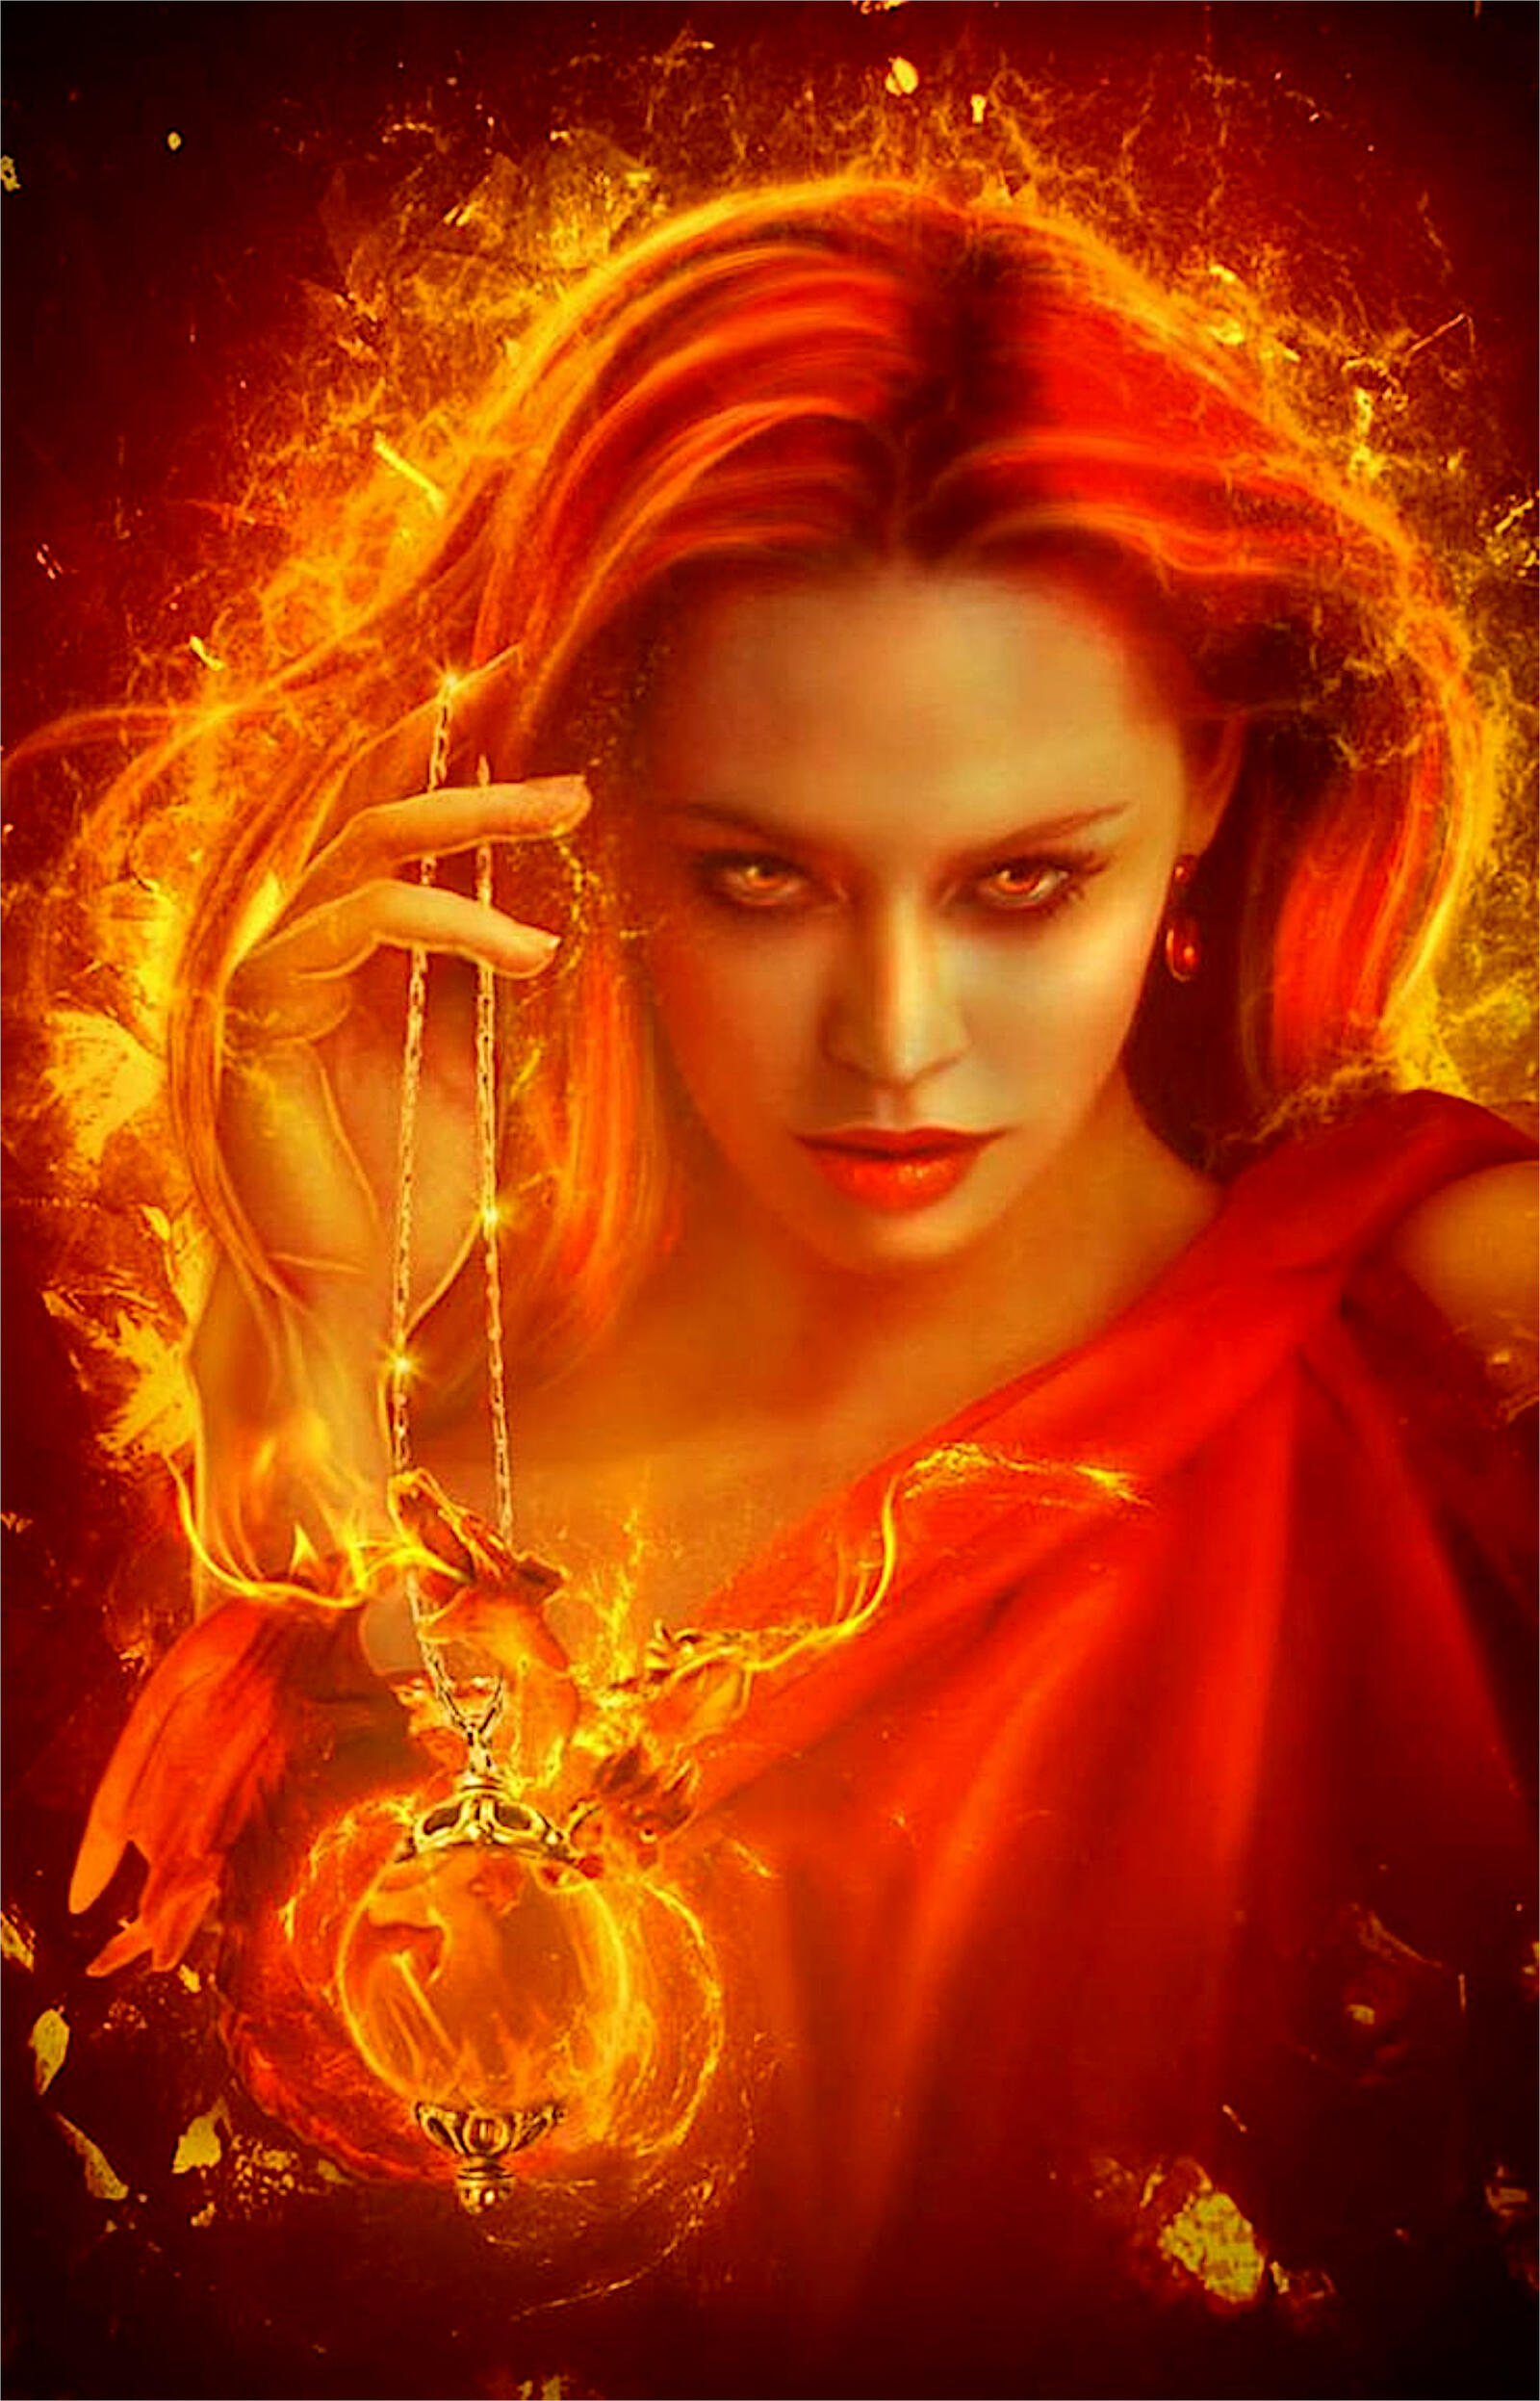 Free photo Rendering of a portrait of a girl in flames